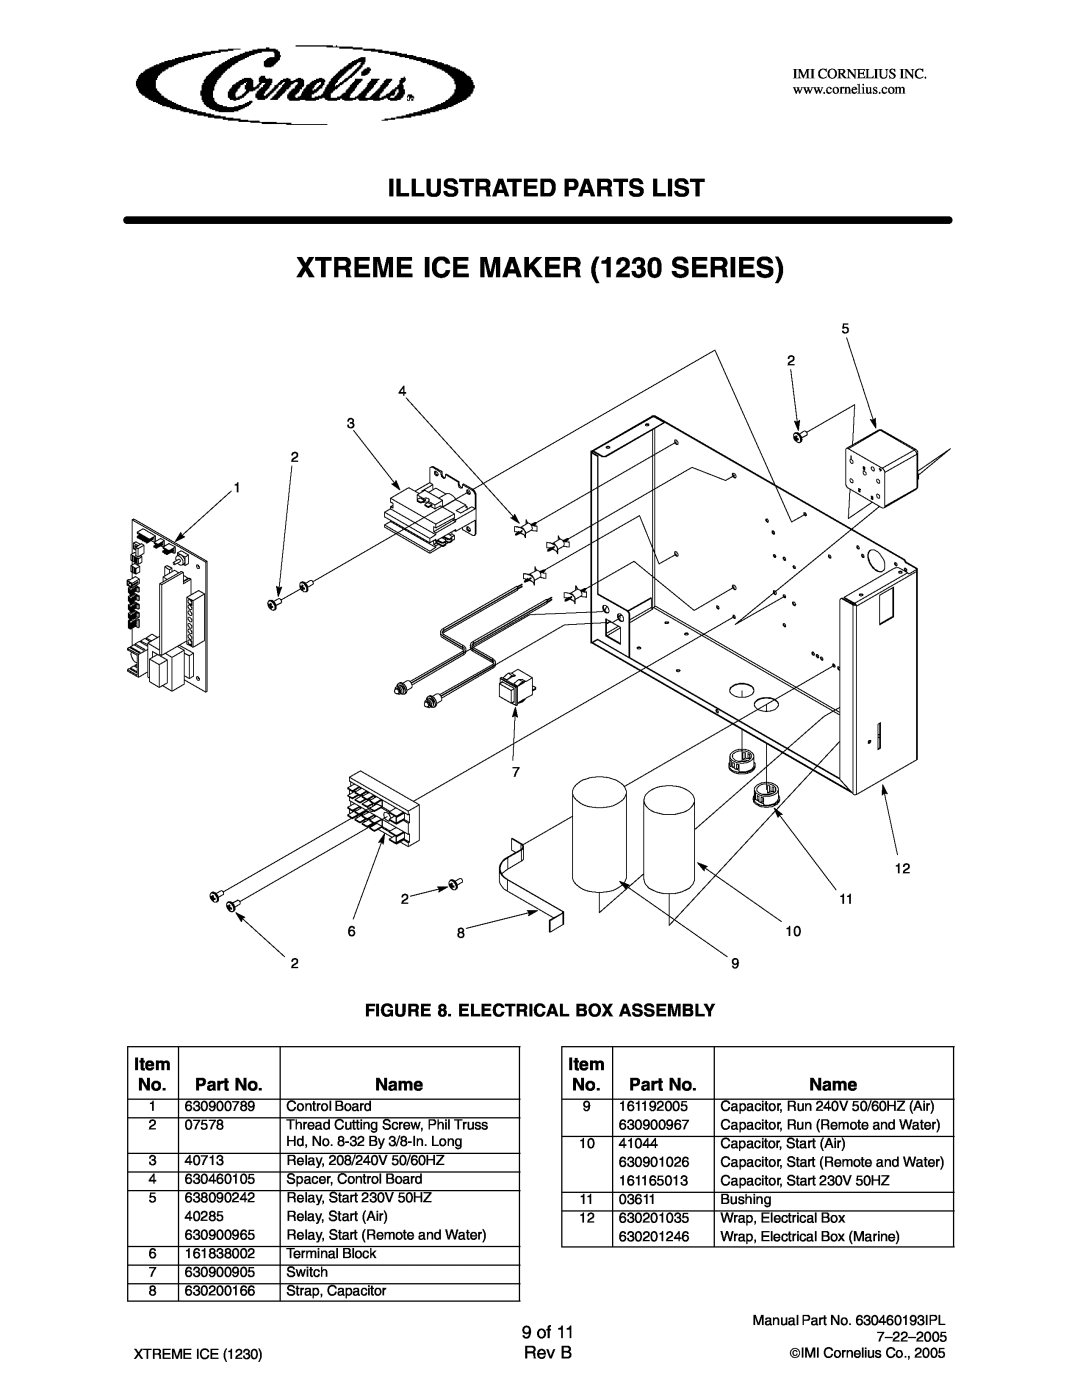 Cornelius 631812041 manual 9 of, XTREME ICE MAKER 1230 SERIES, Illustrated Parts List, Electrical Box Assembly, Name, Rev B 